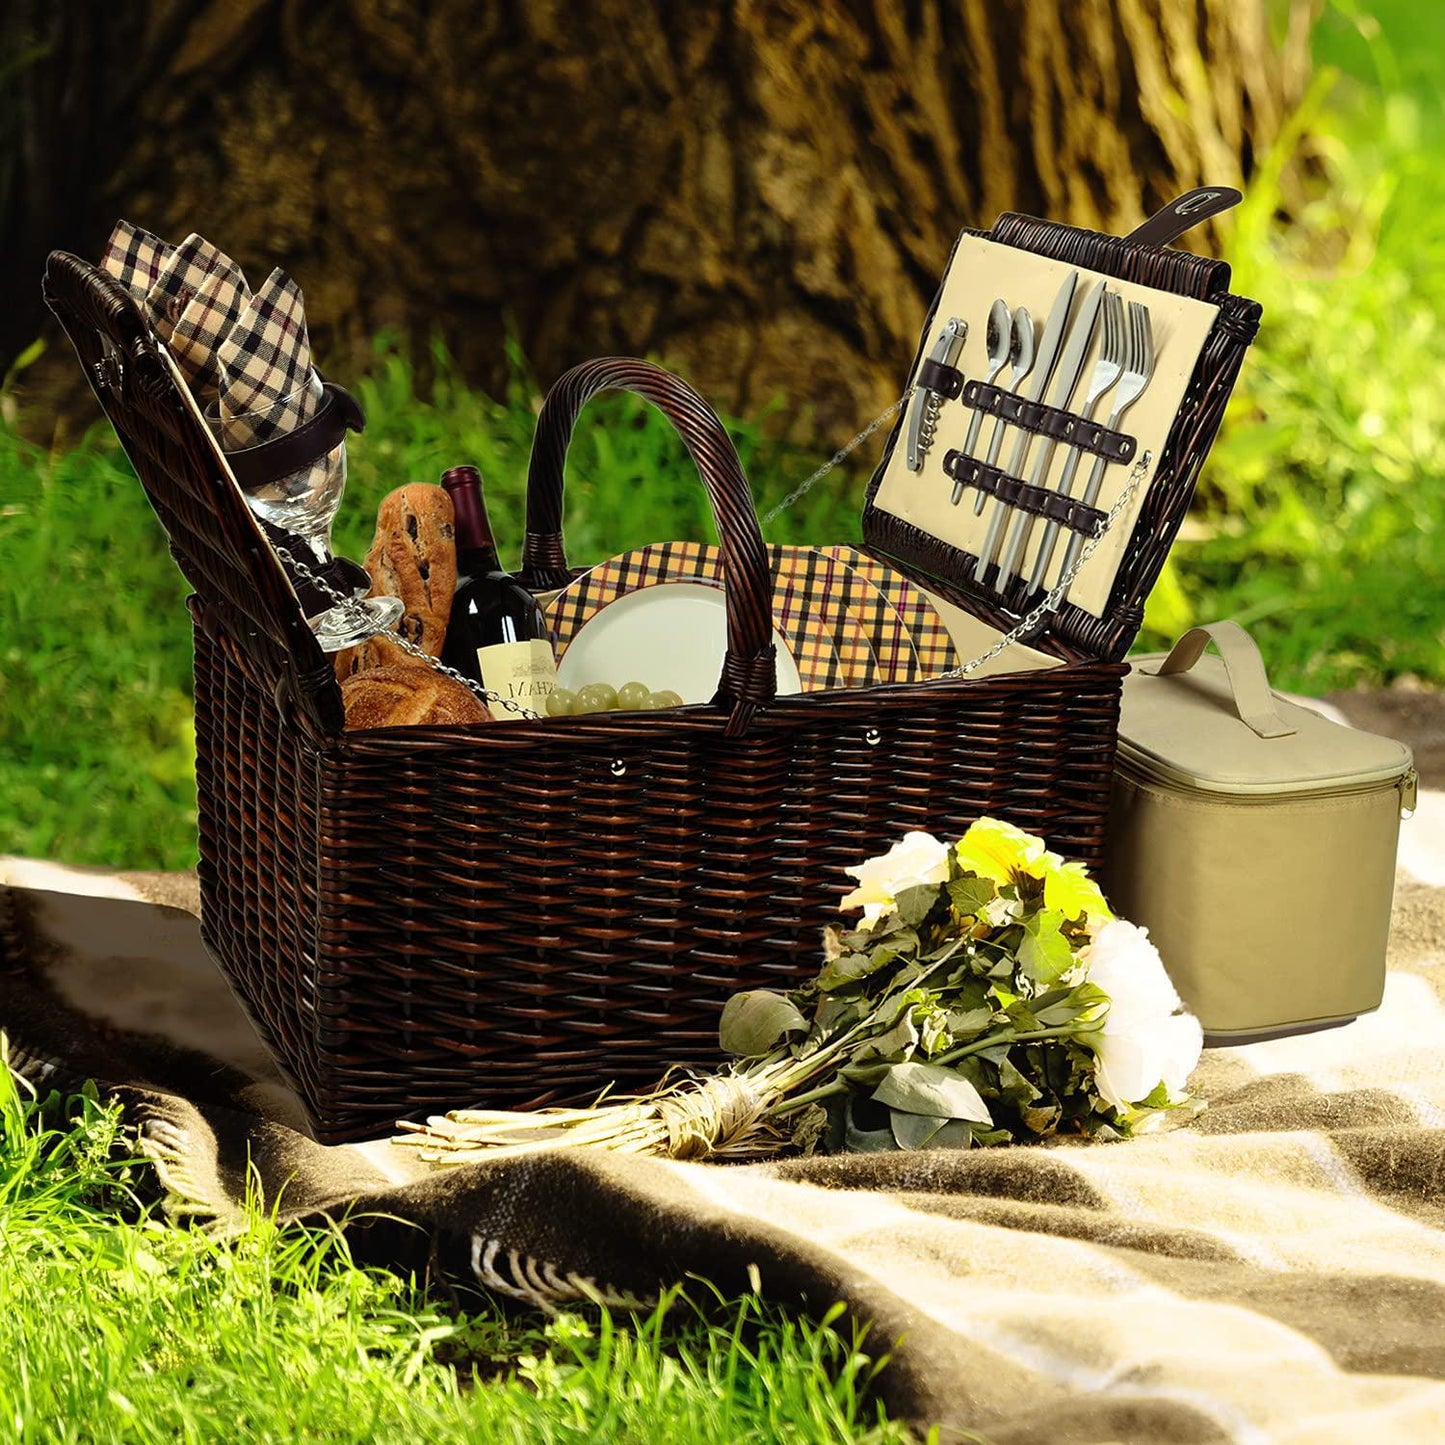 Picnic at Ascot Buckingham Willow Picnic Basket with Service for 4 with Blanket and Coffee Service- Designed, Assembled and Quality Approved in the USA